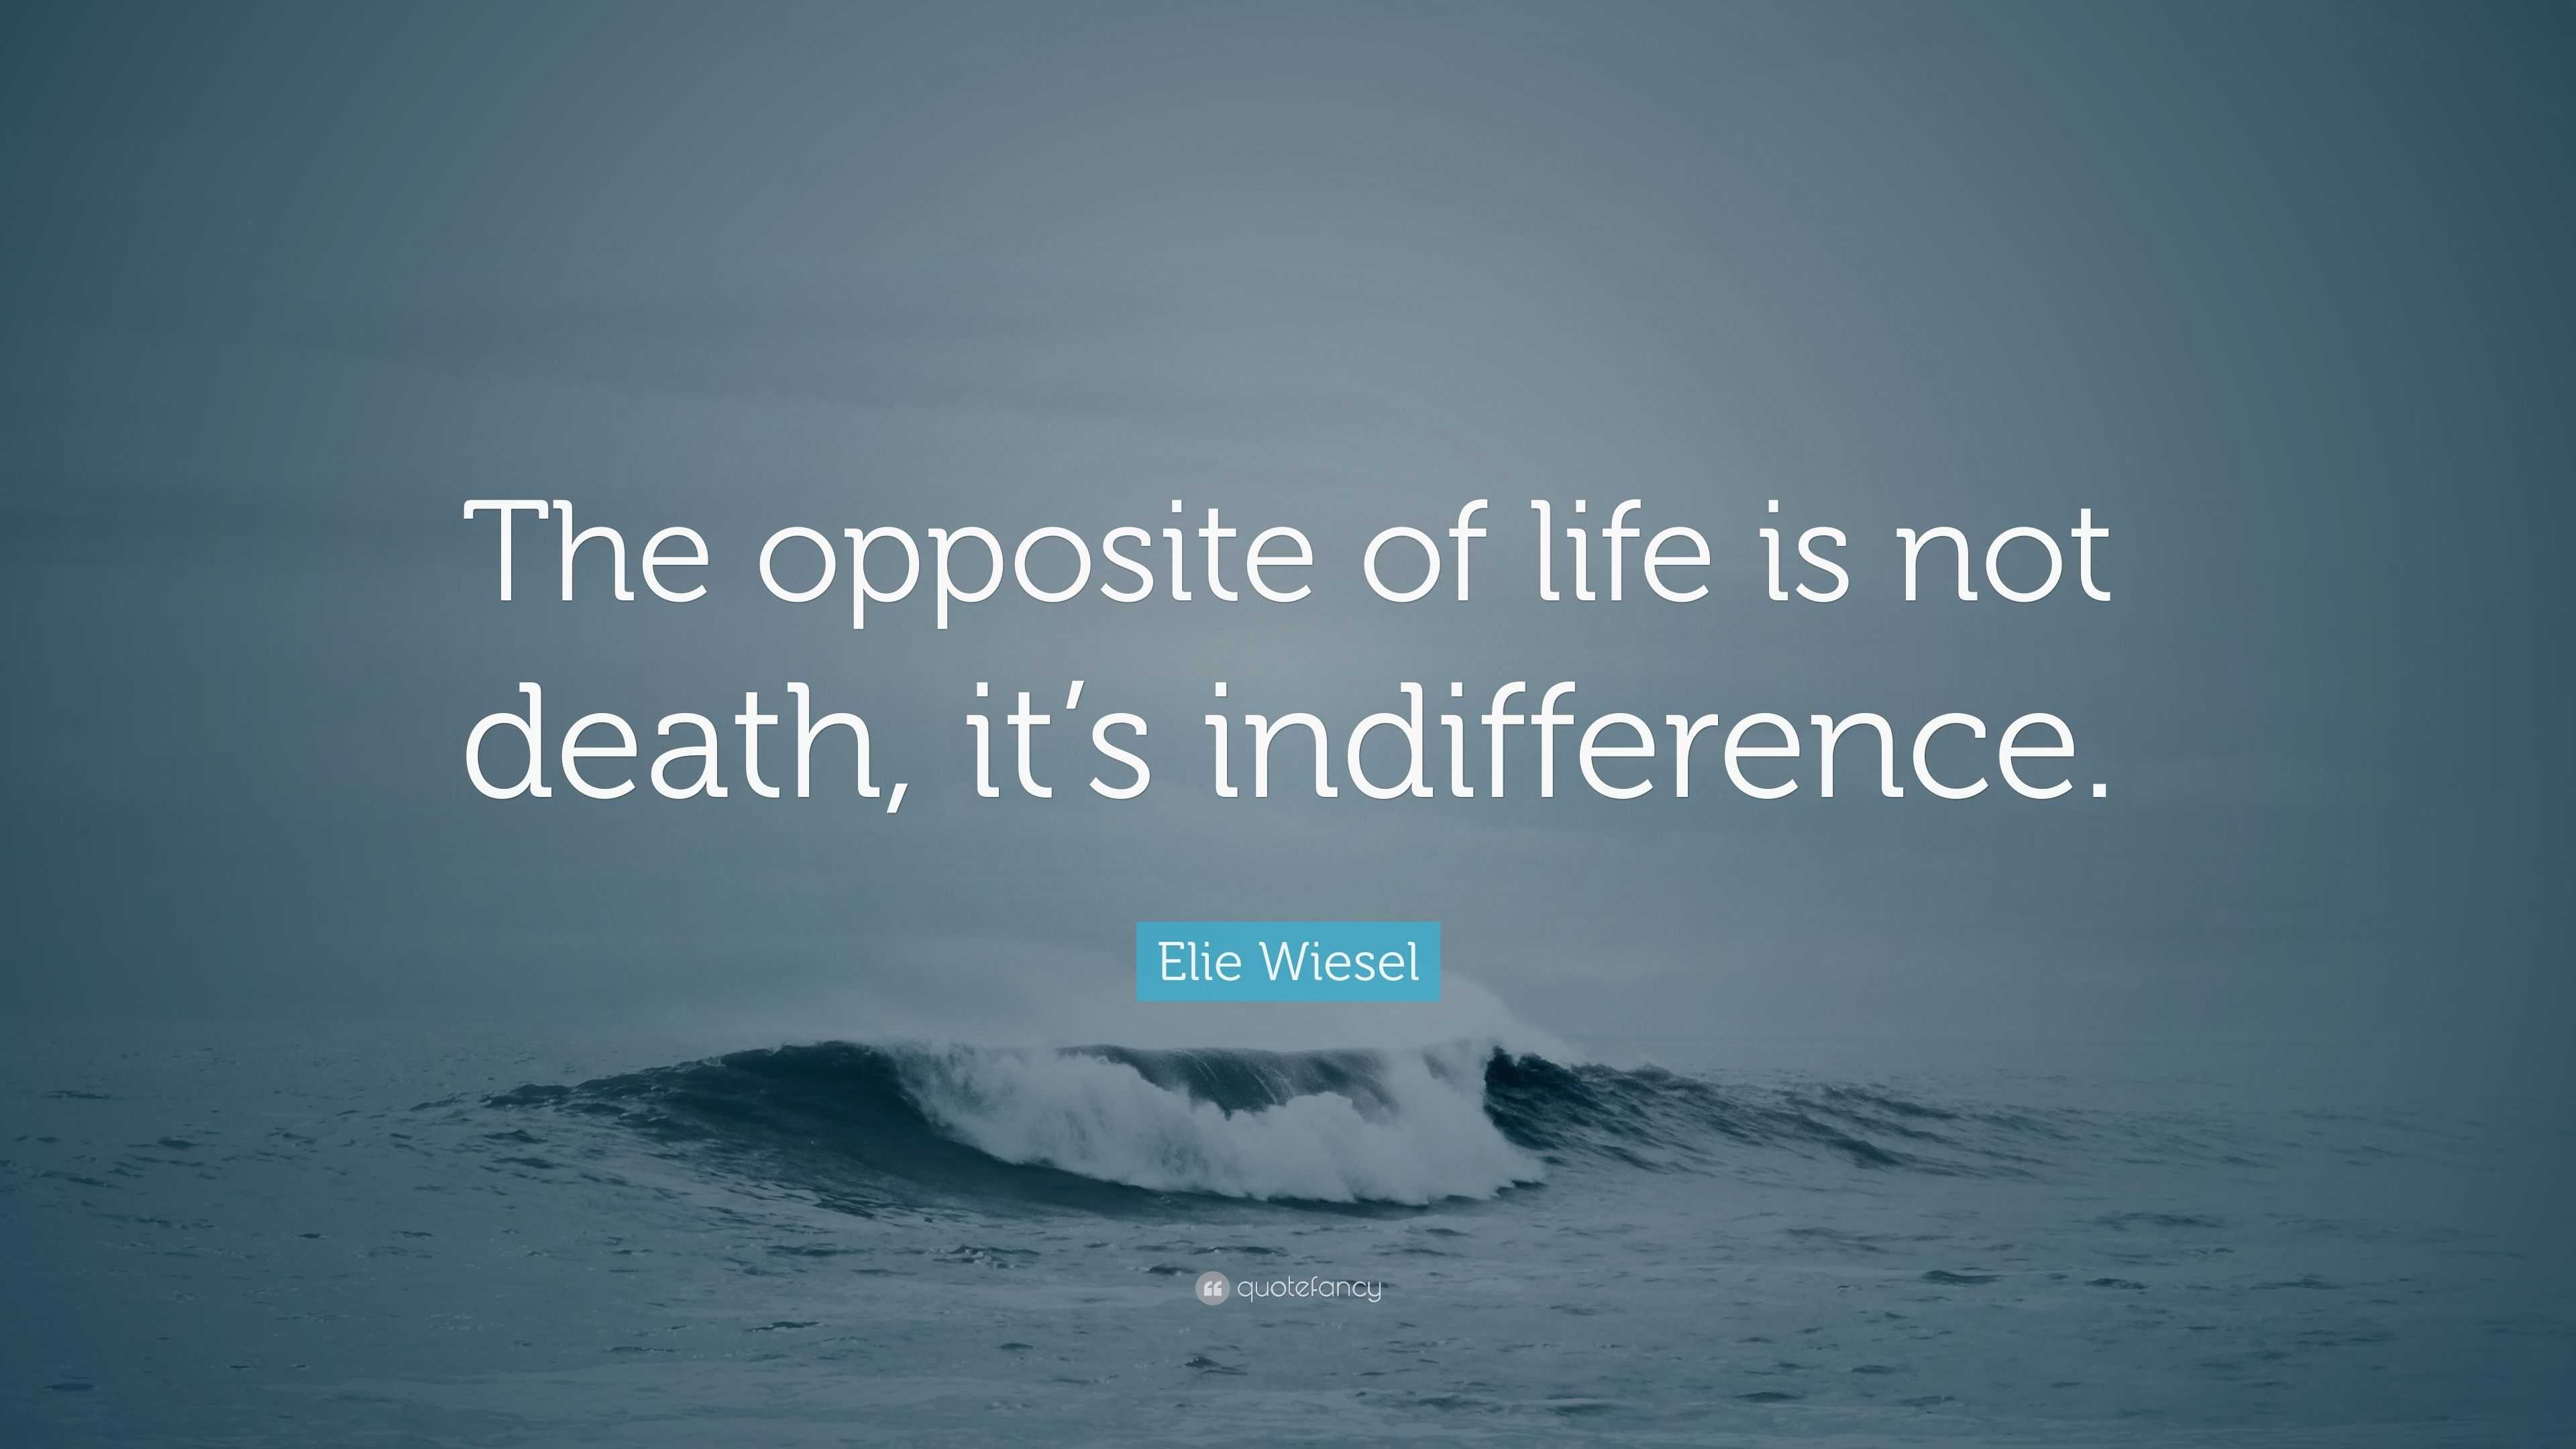 Elie Wiesel Quote: "The opposite of life is not death, it's indifference."